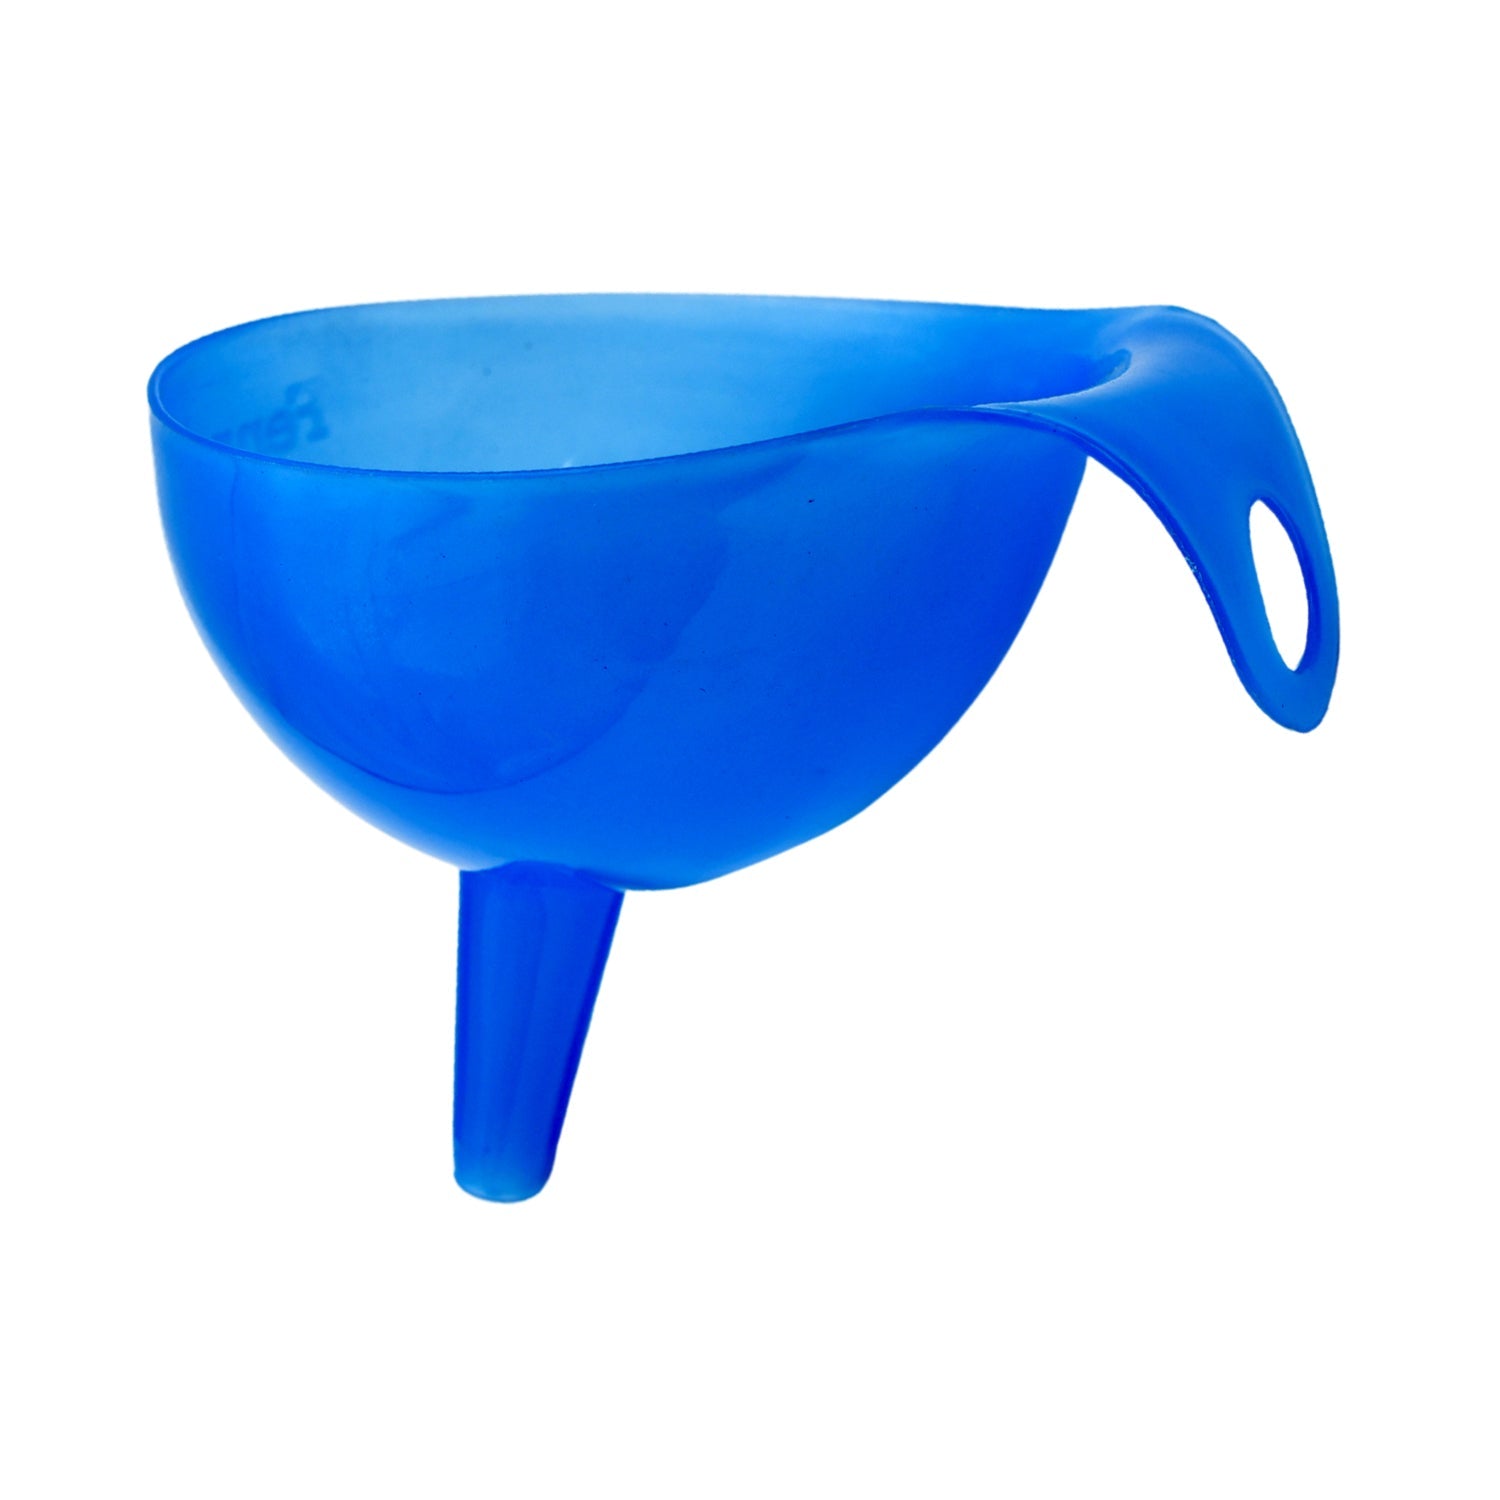 17555 Plastic Funnel For Pouring Oil, Sauce, Water, Juice Cooking Oil, Powder, Small Food-Grains Food Grade Plastic Funnel (1 Pc)